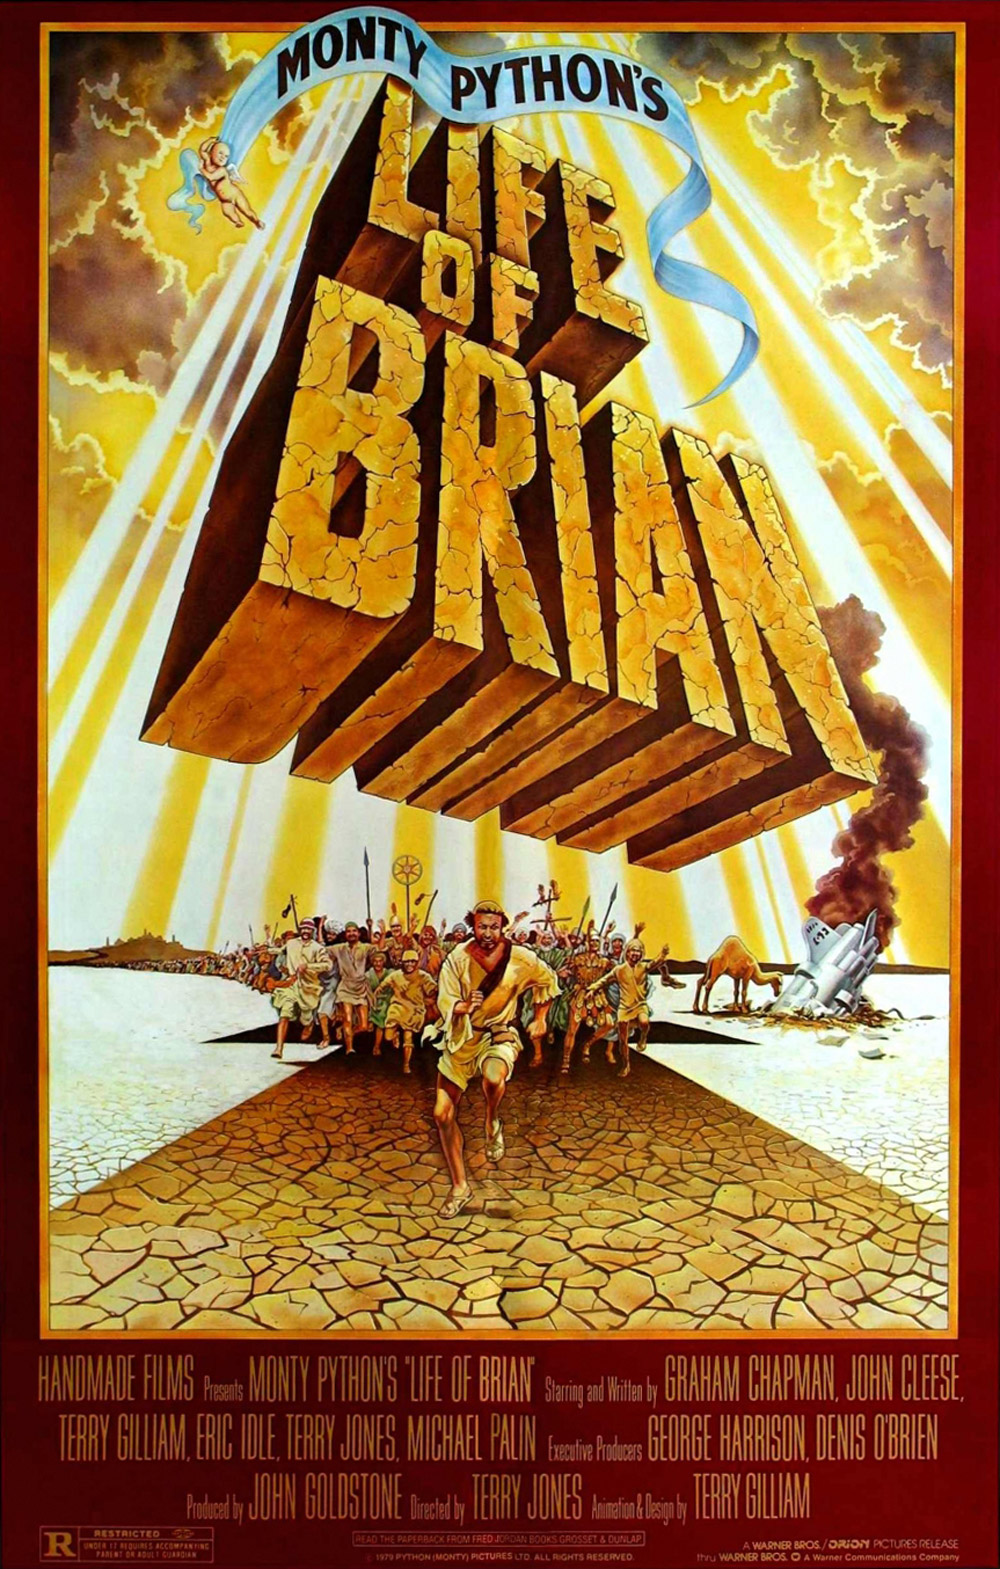 Brian, born on the same day as the Messiah, is mistaken to be the Messiah himself while growing up. He eventually becomes the face of a revolutionary group in Roman Israel and is hailed as a prophet.